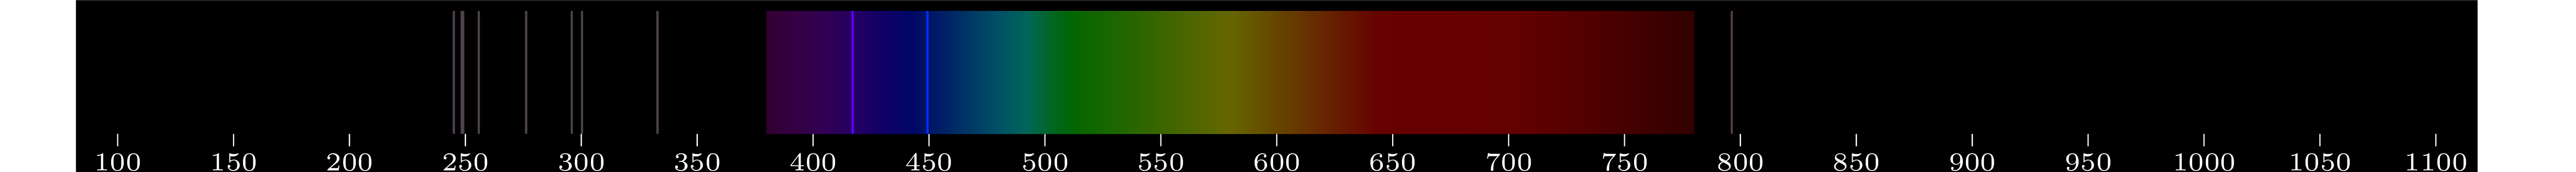 emmision spectra of element Po